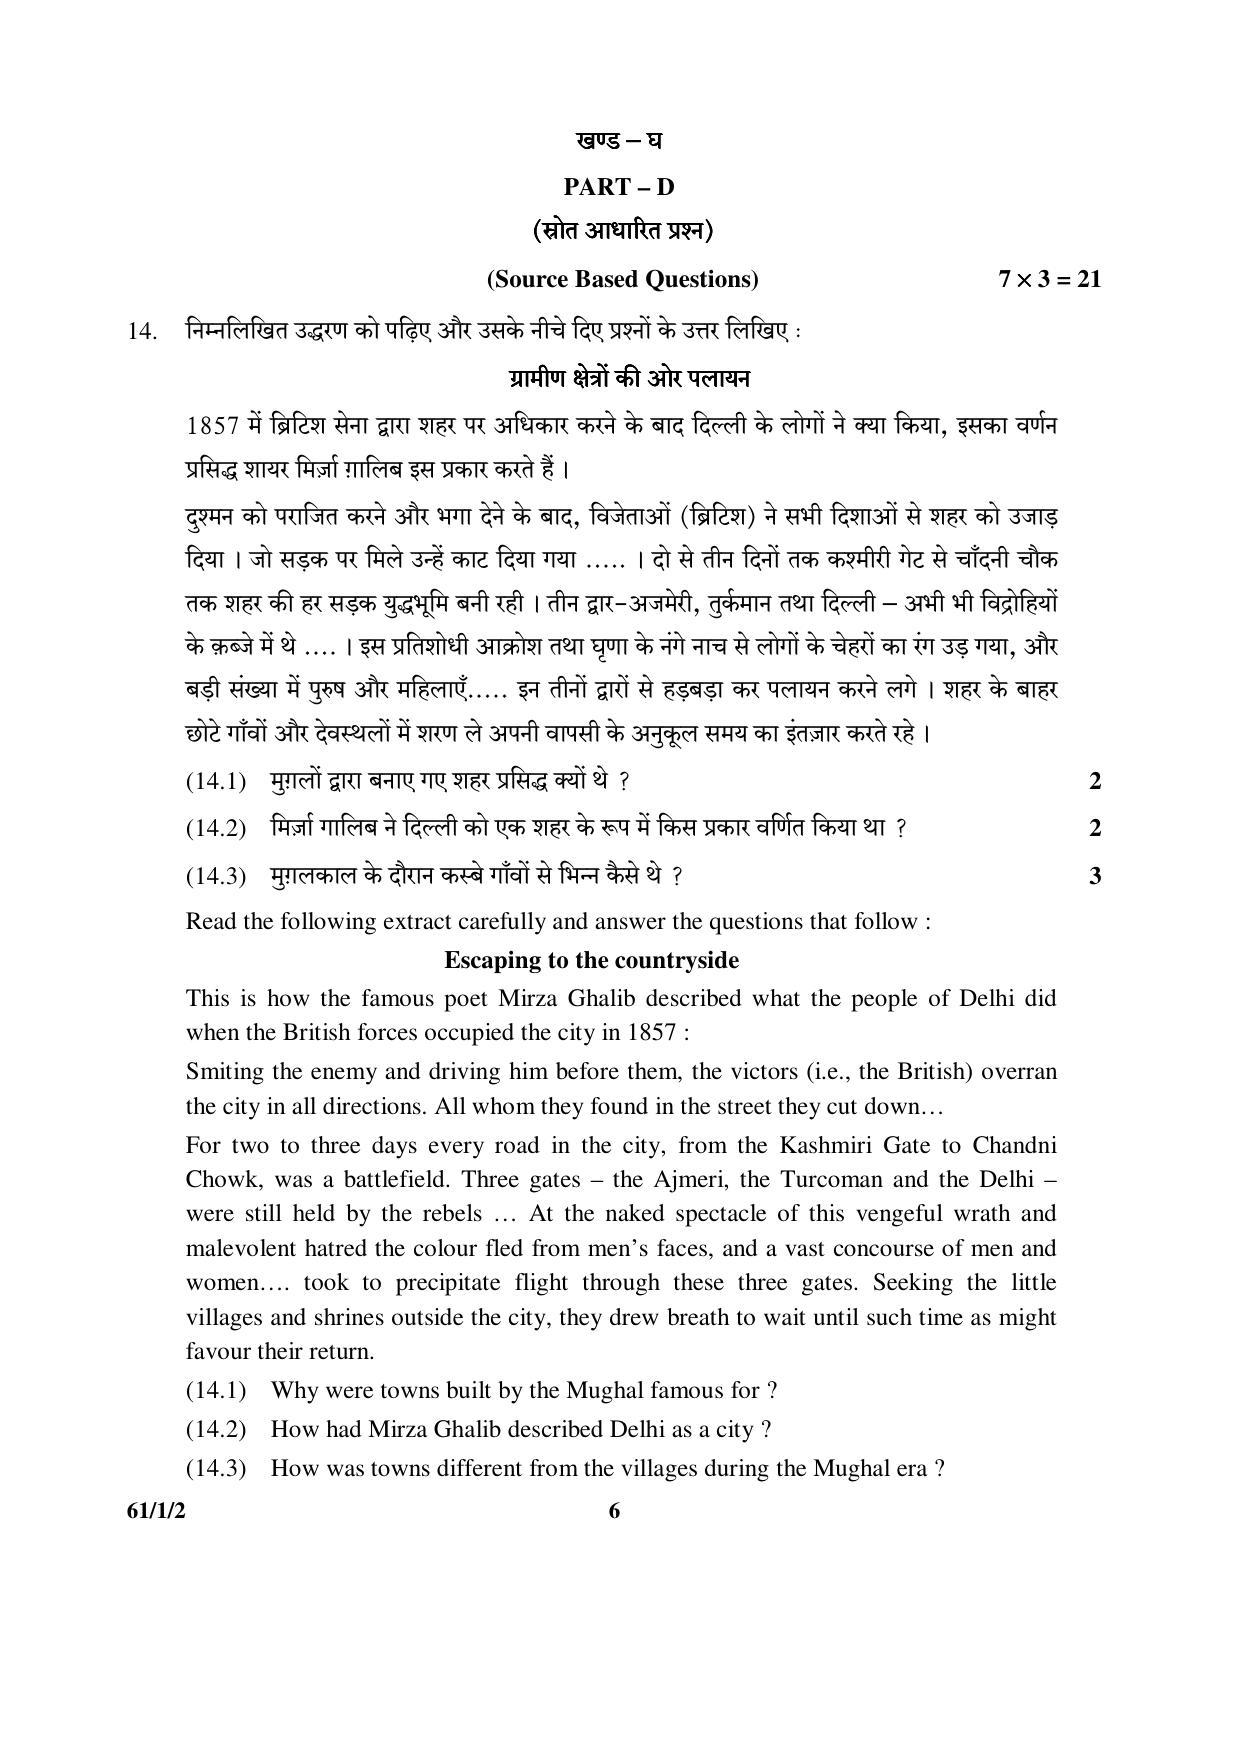 CBSE Class 12 61-1-2  (History) 2017-comptt Question Paper - Page 6